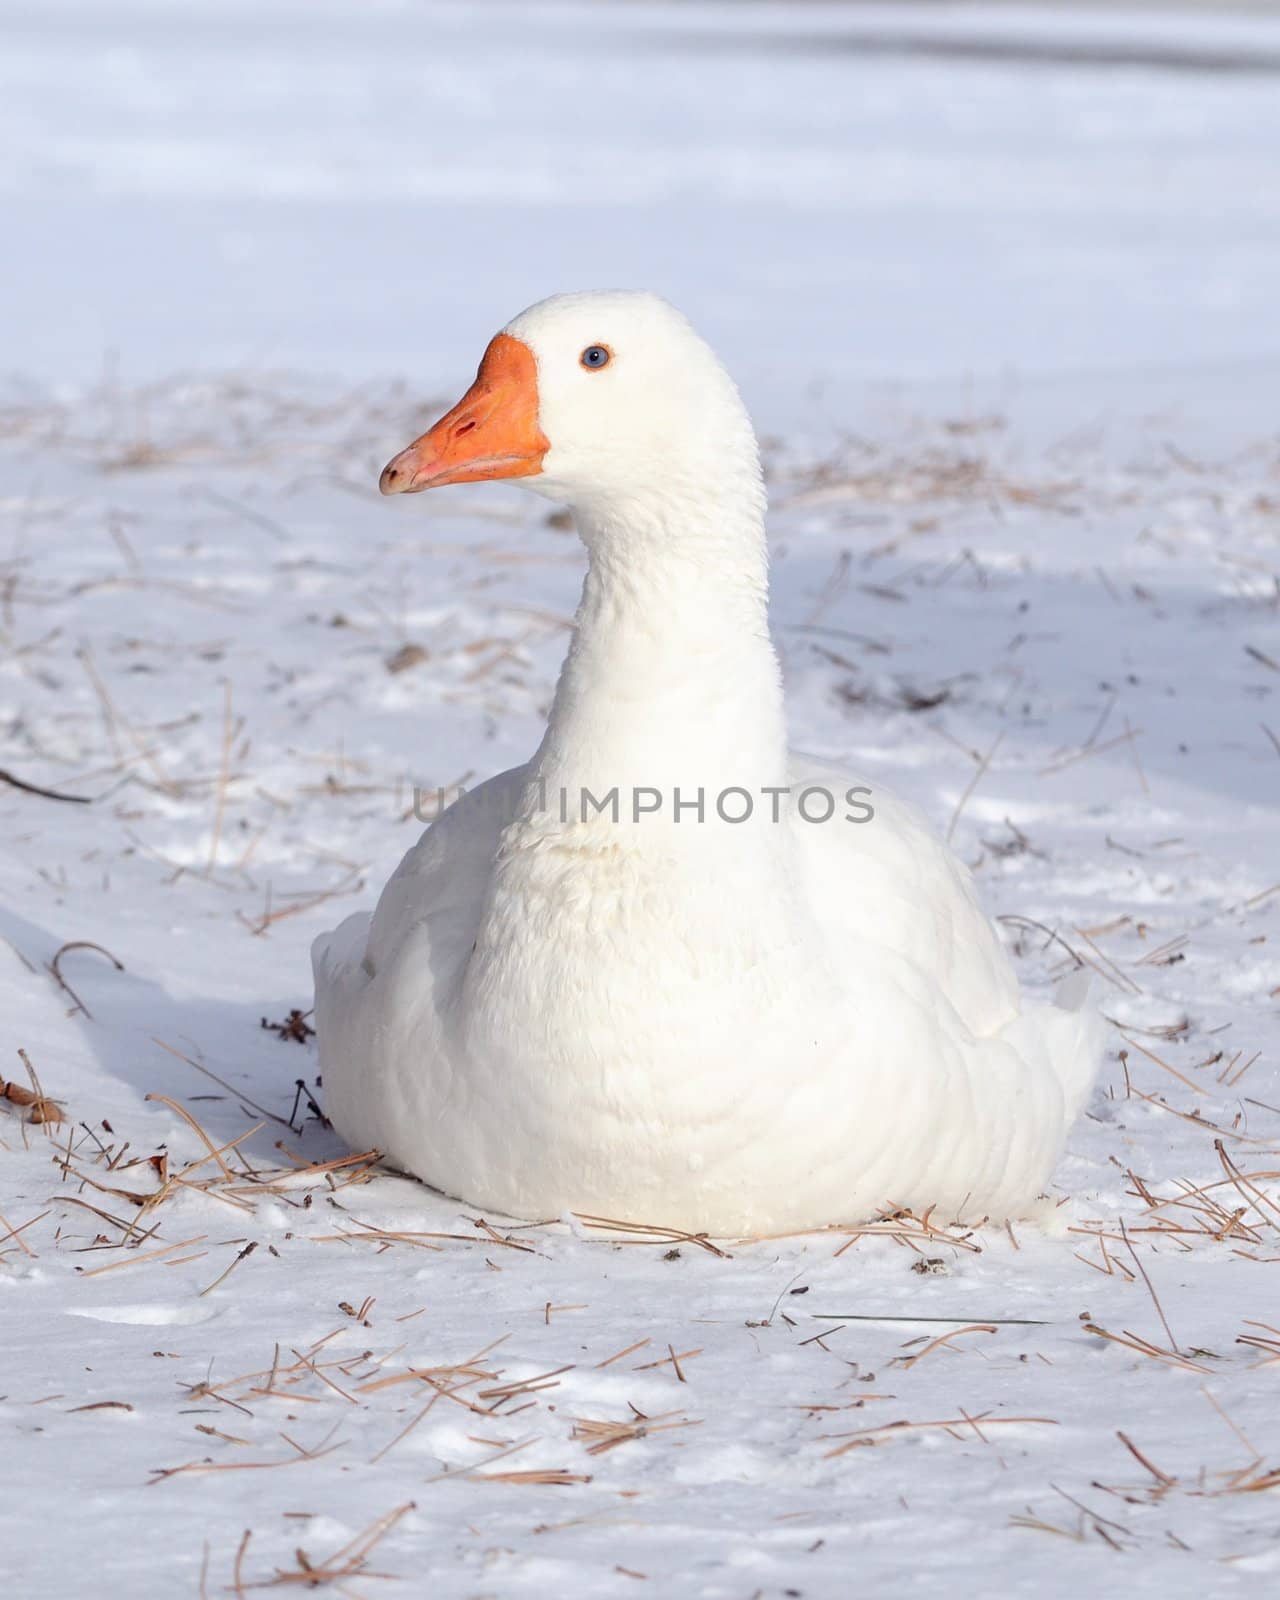 White Goose by brm1949